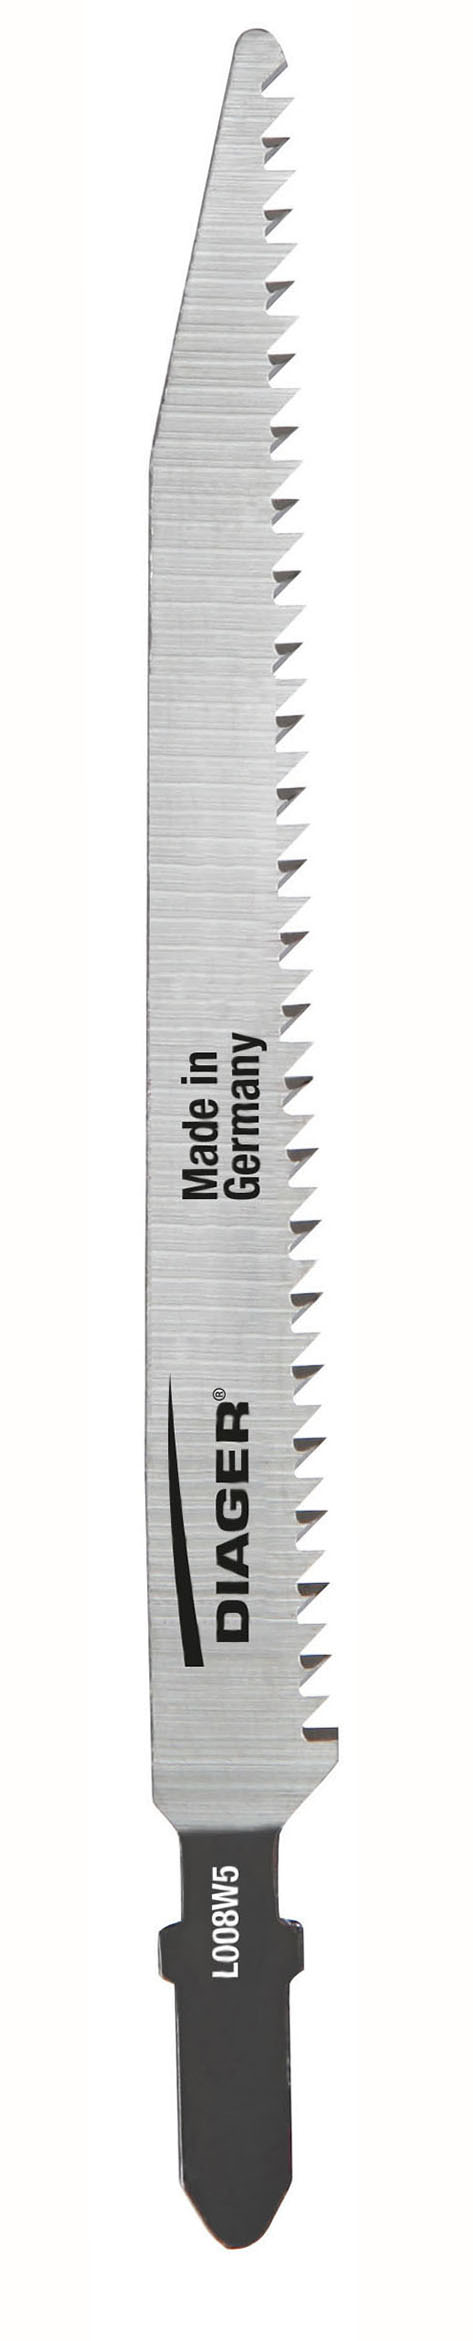 Sawing Soft and hard wood 2-40 mm Jigsaw blade with inverted teeth for fast and clean cutting - L008W.jpg